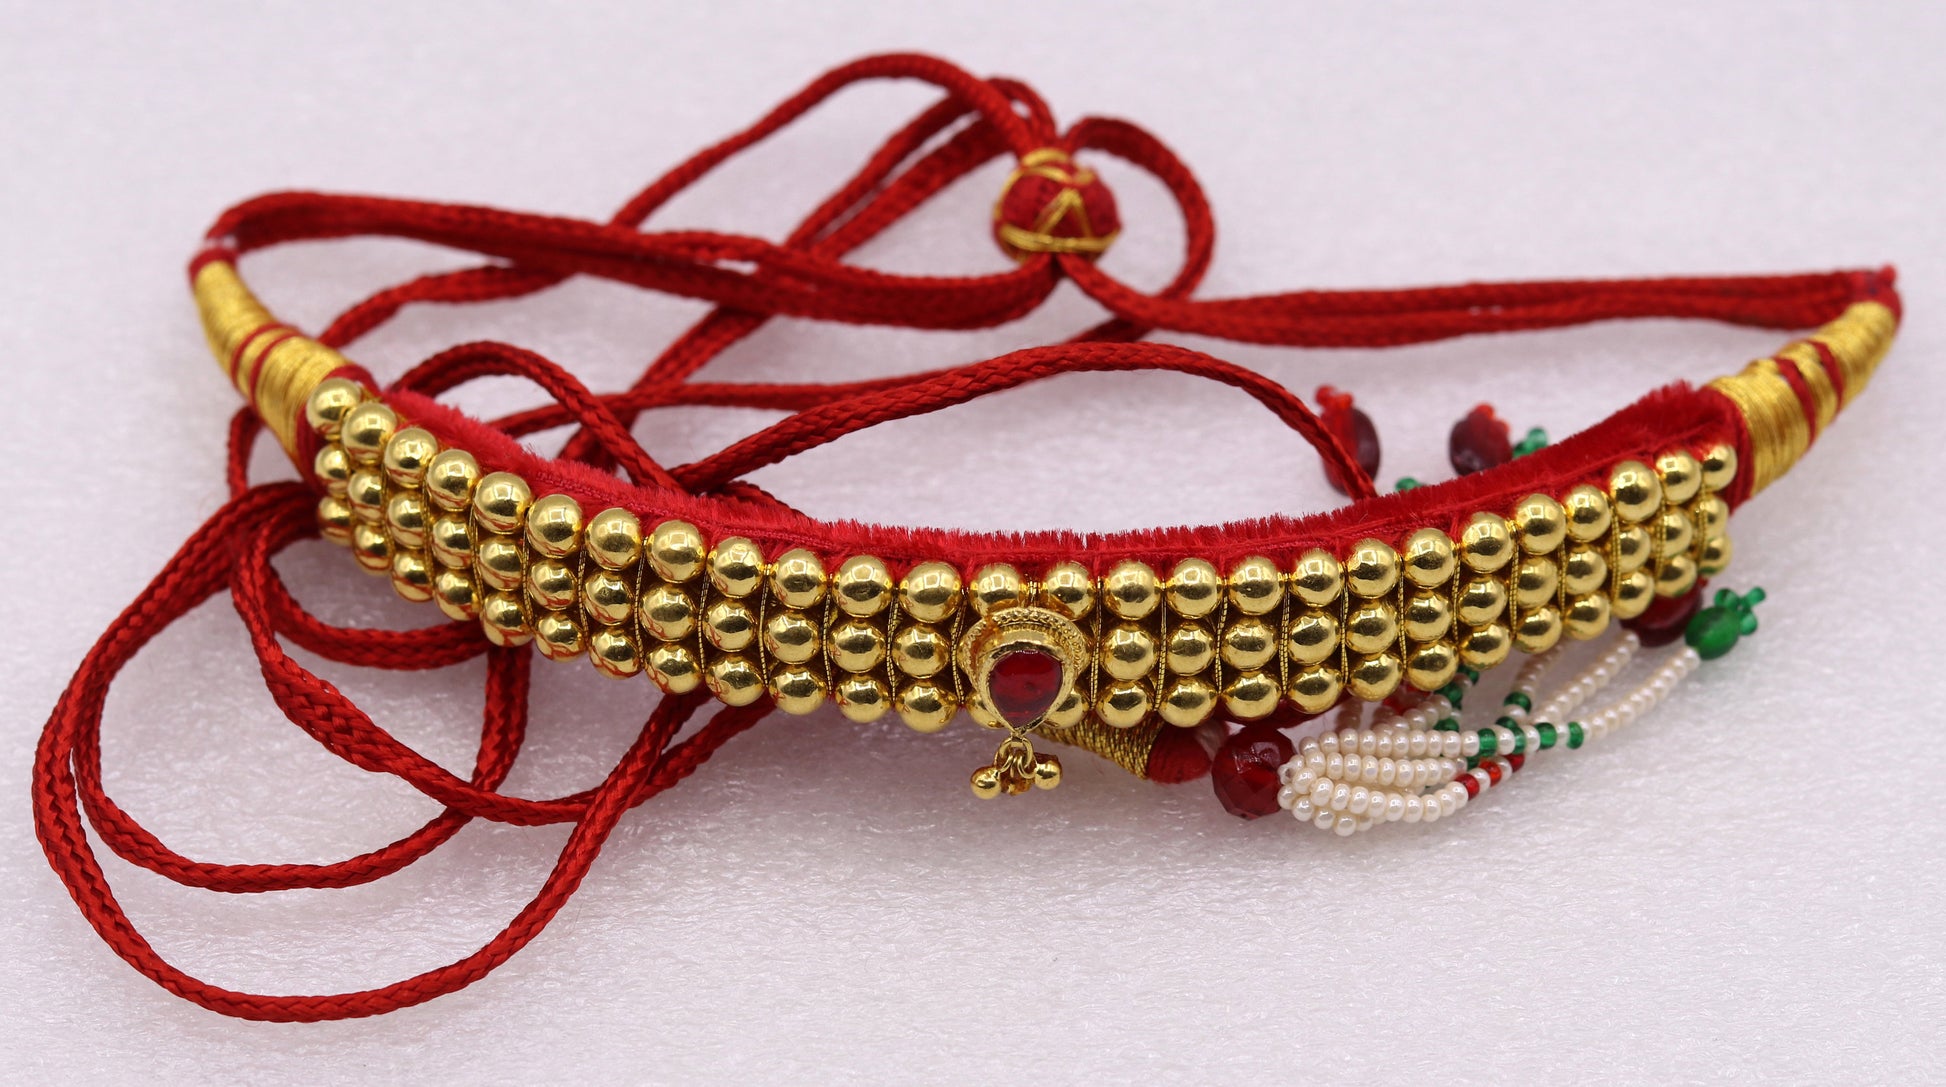 Traditional design handmade 22karat yellow gold beads or ball tribal necklace bajanti wedding jewelry from rajasthan india - TRIBAL ORNAMENTS